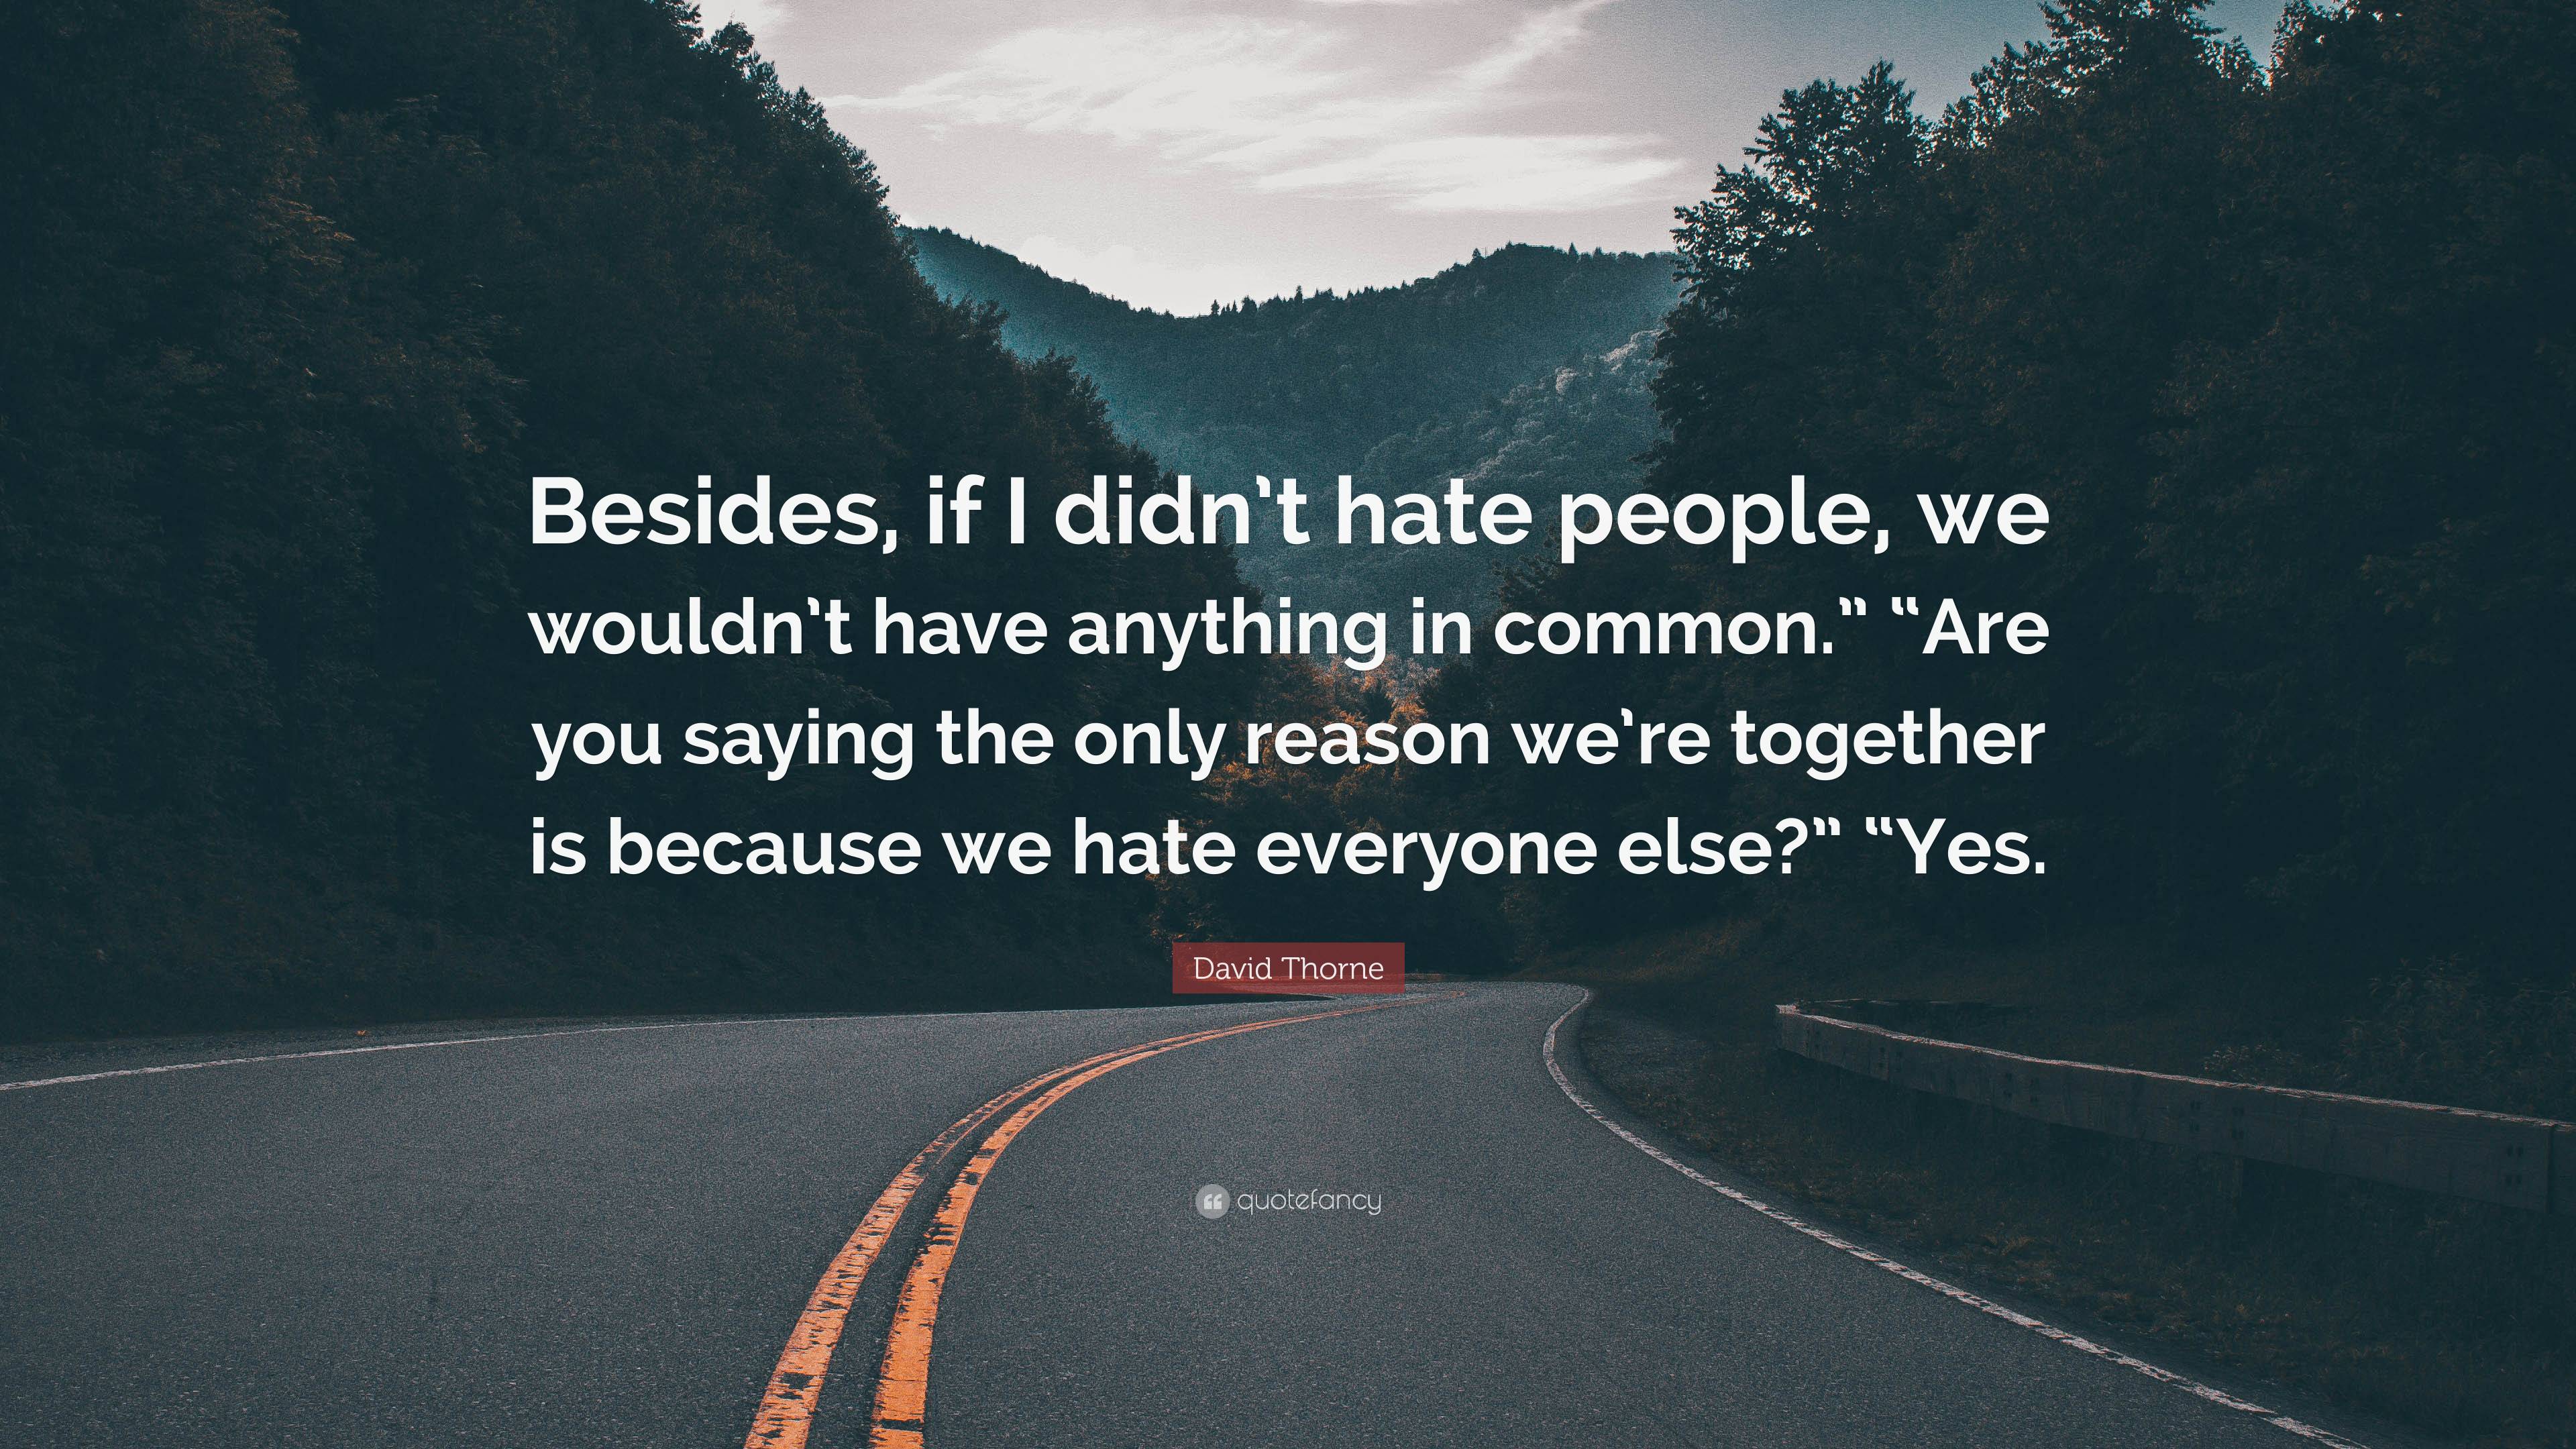 David Thorne Quote: “Besides, if I didn't hate people, we wouldn't